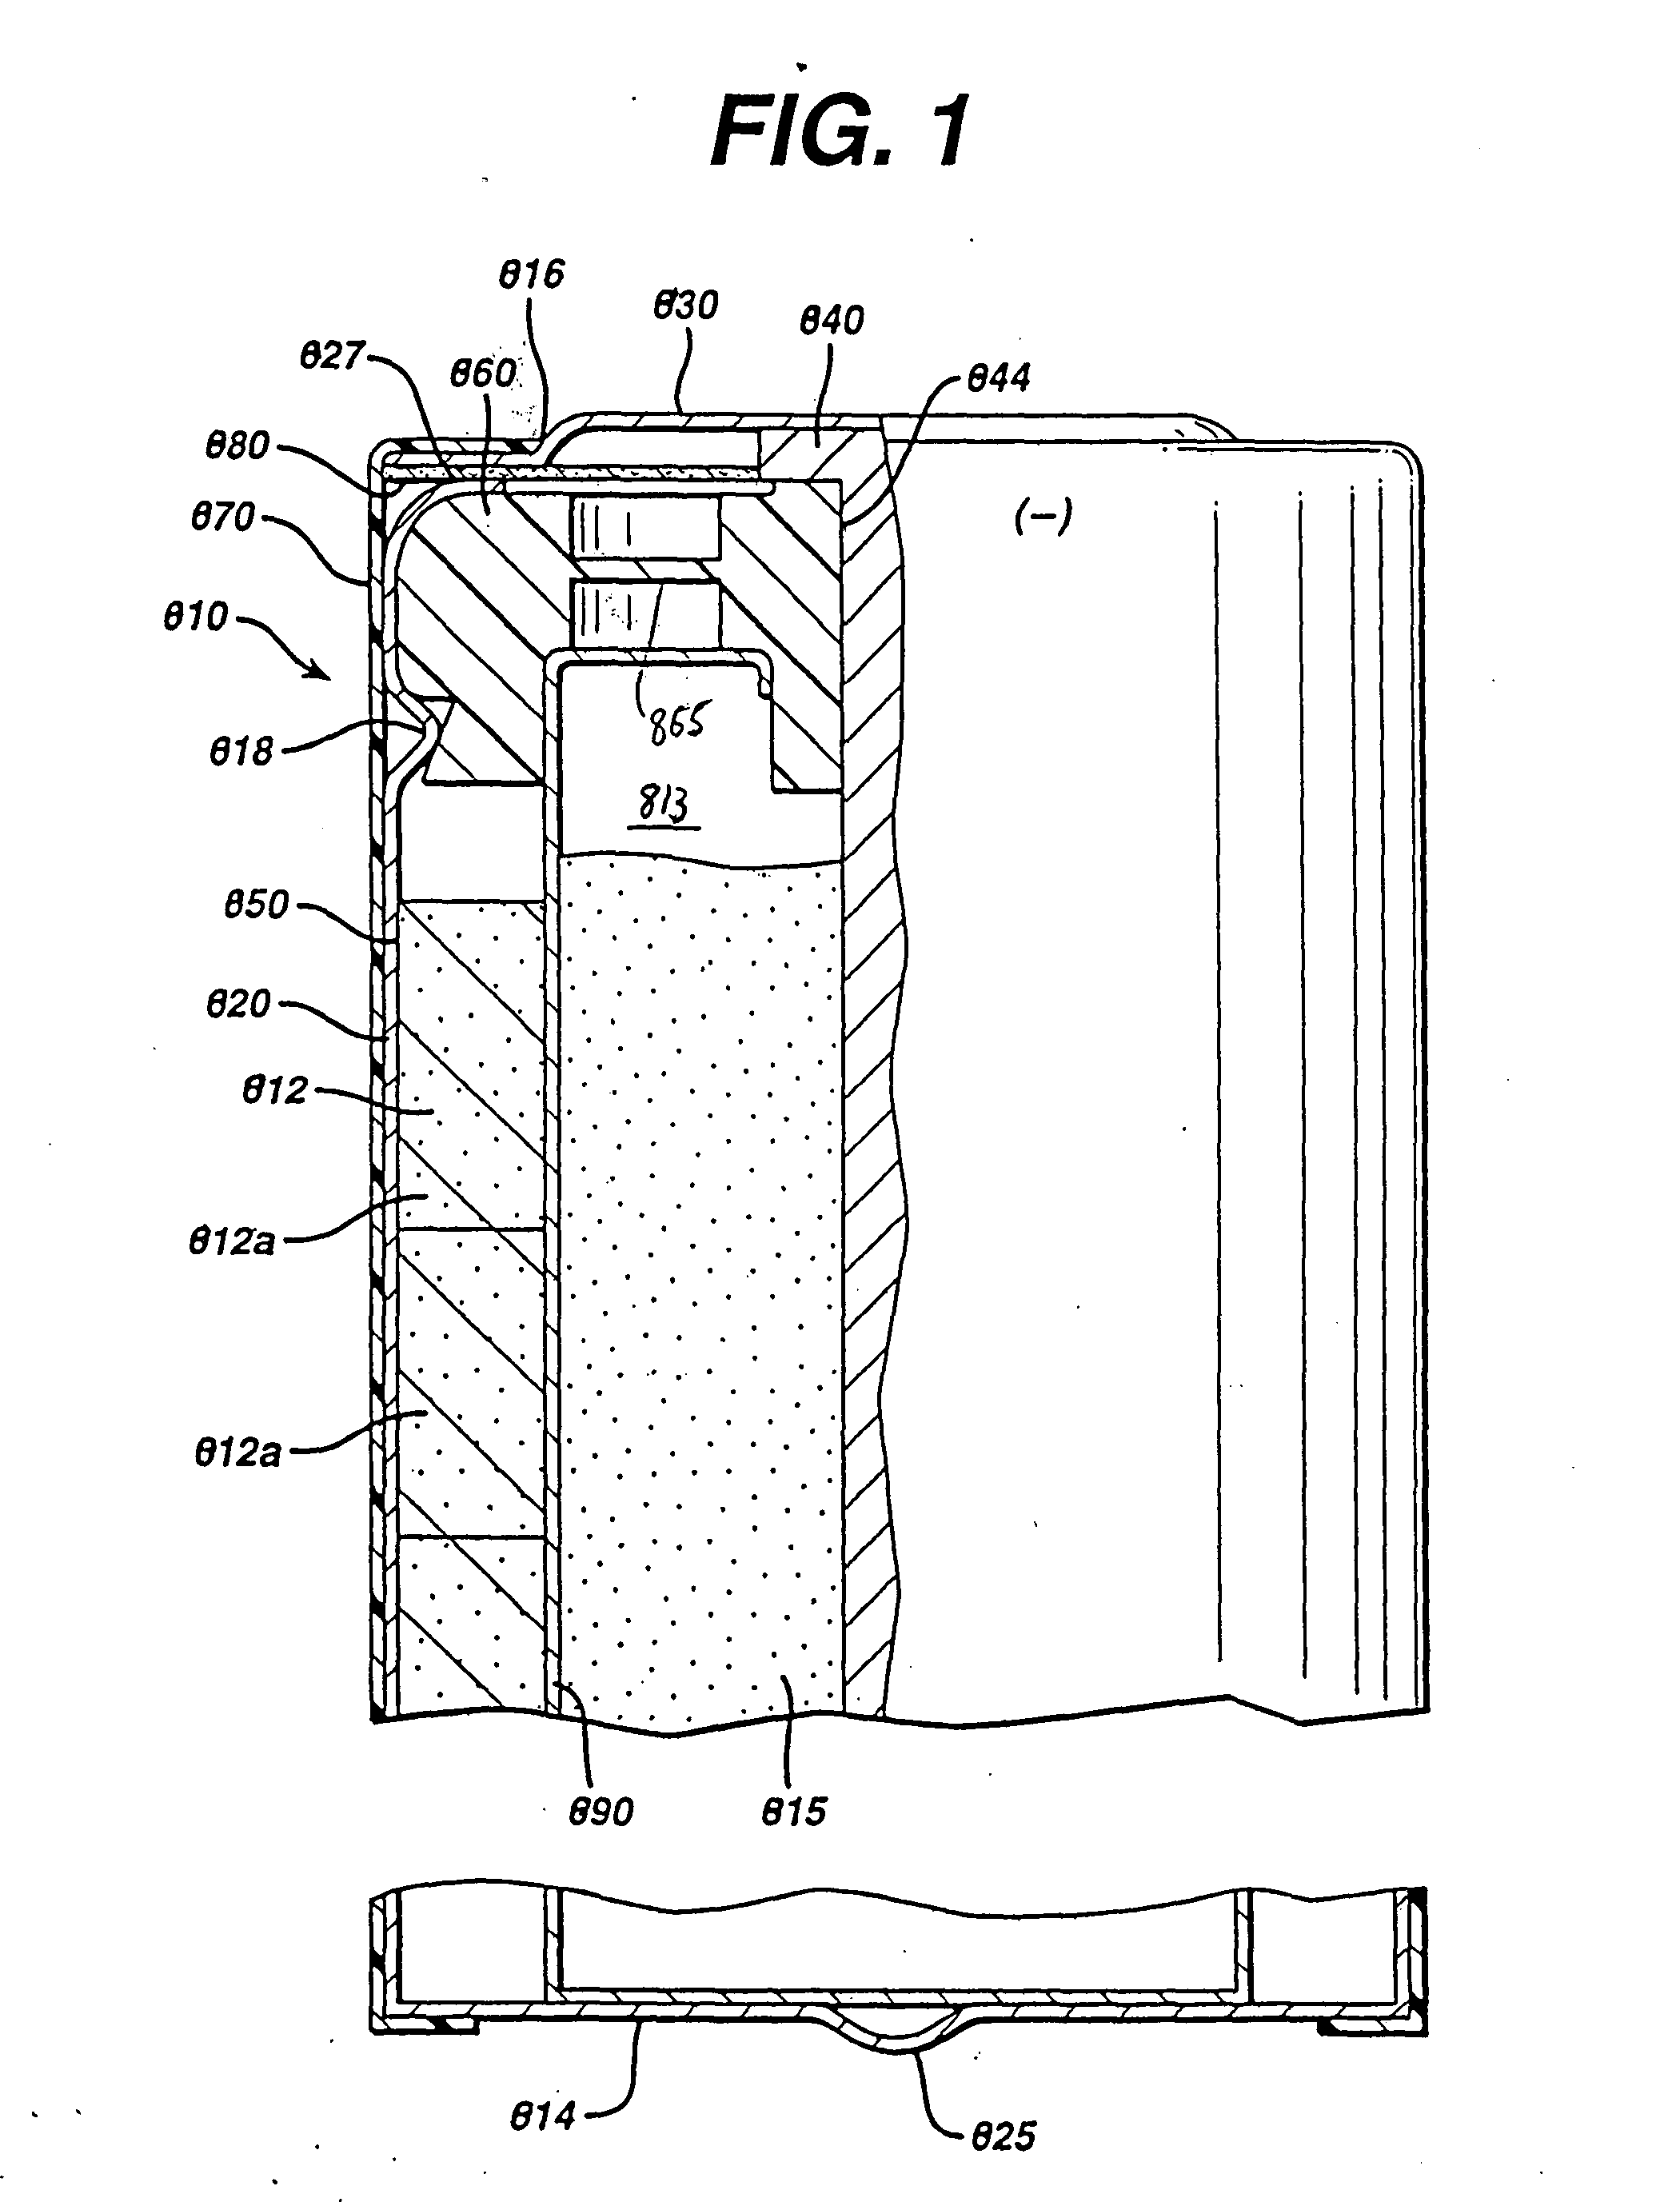 Alkaline cell with improved anode